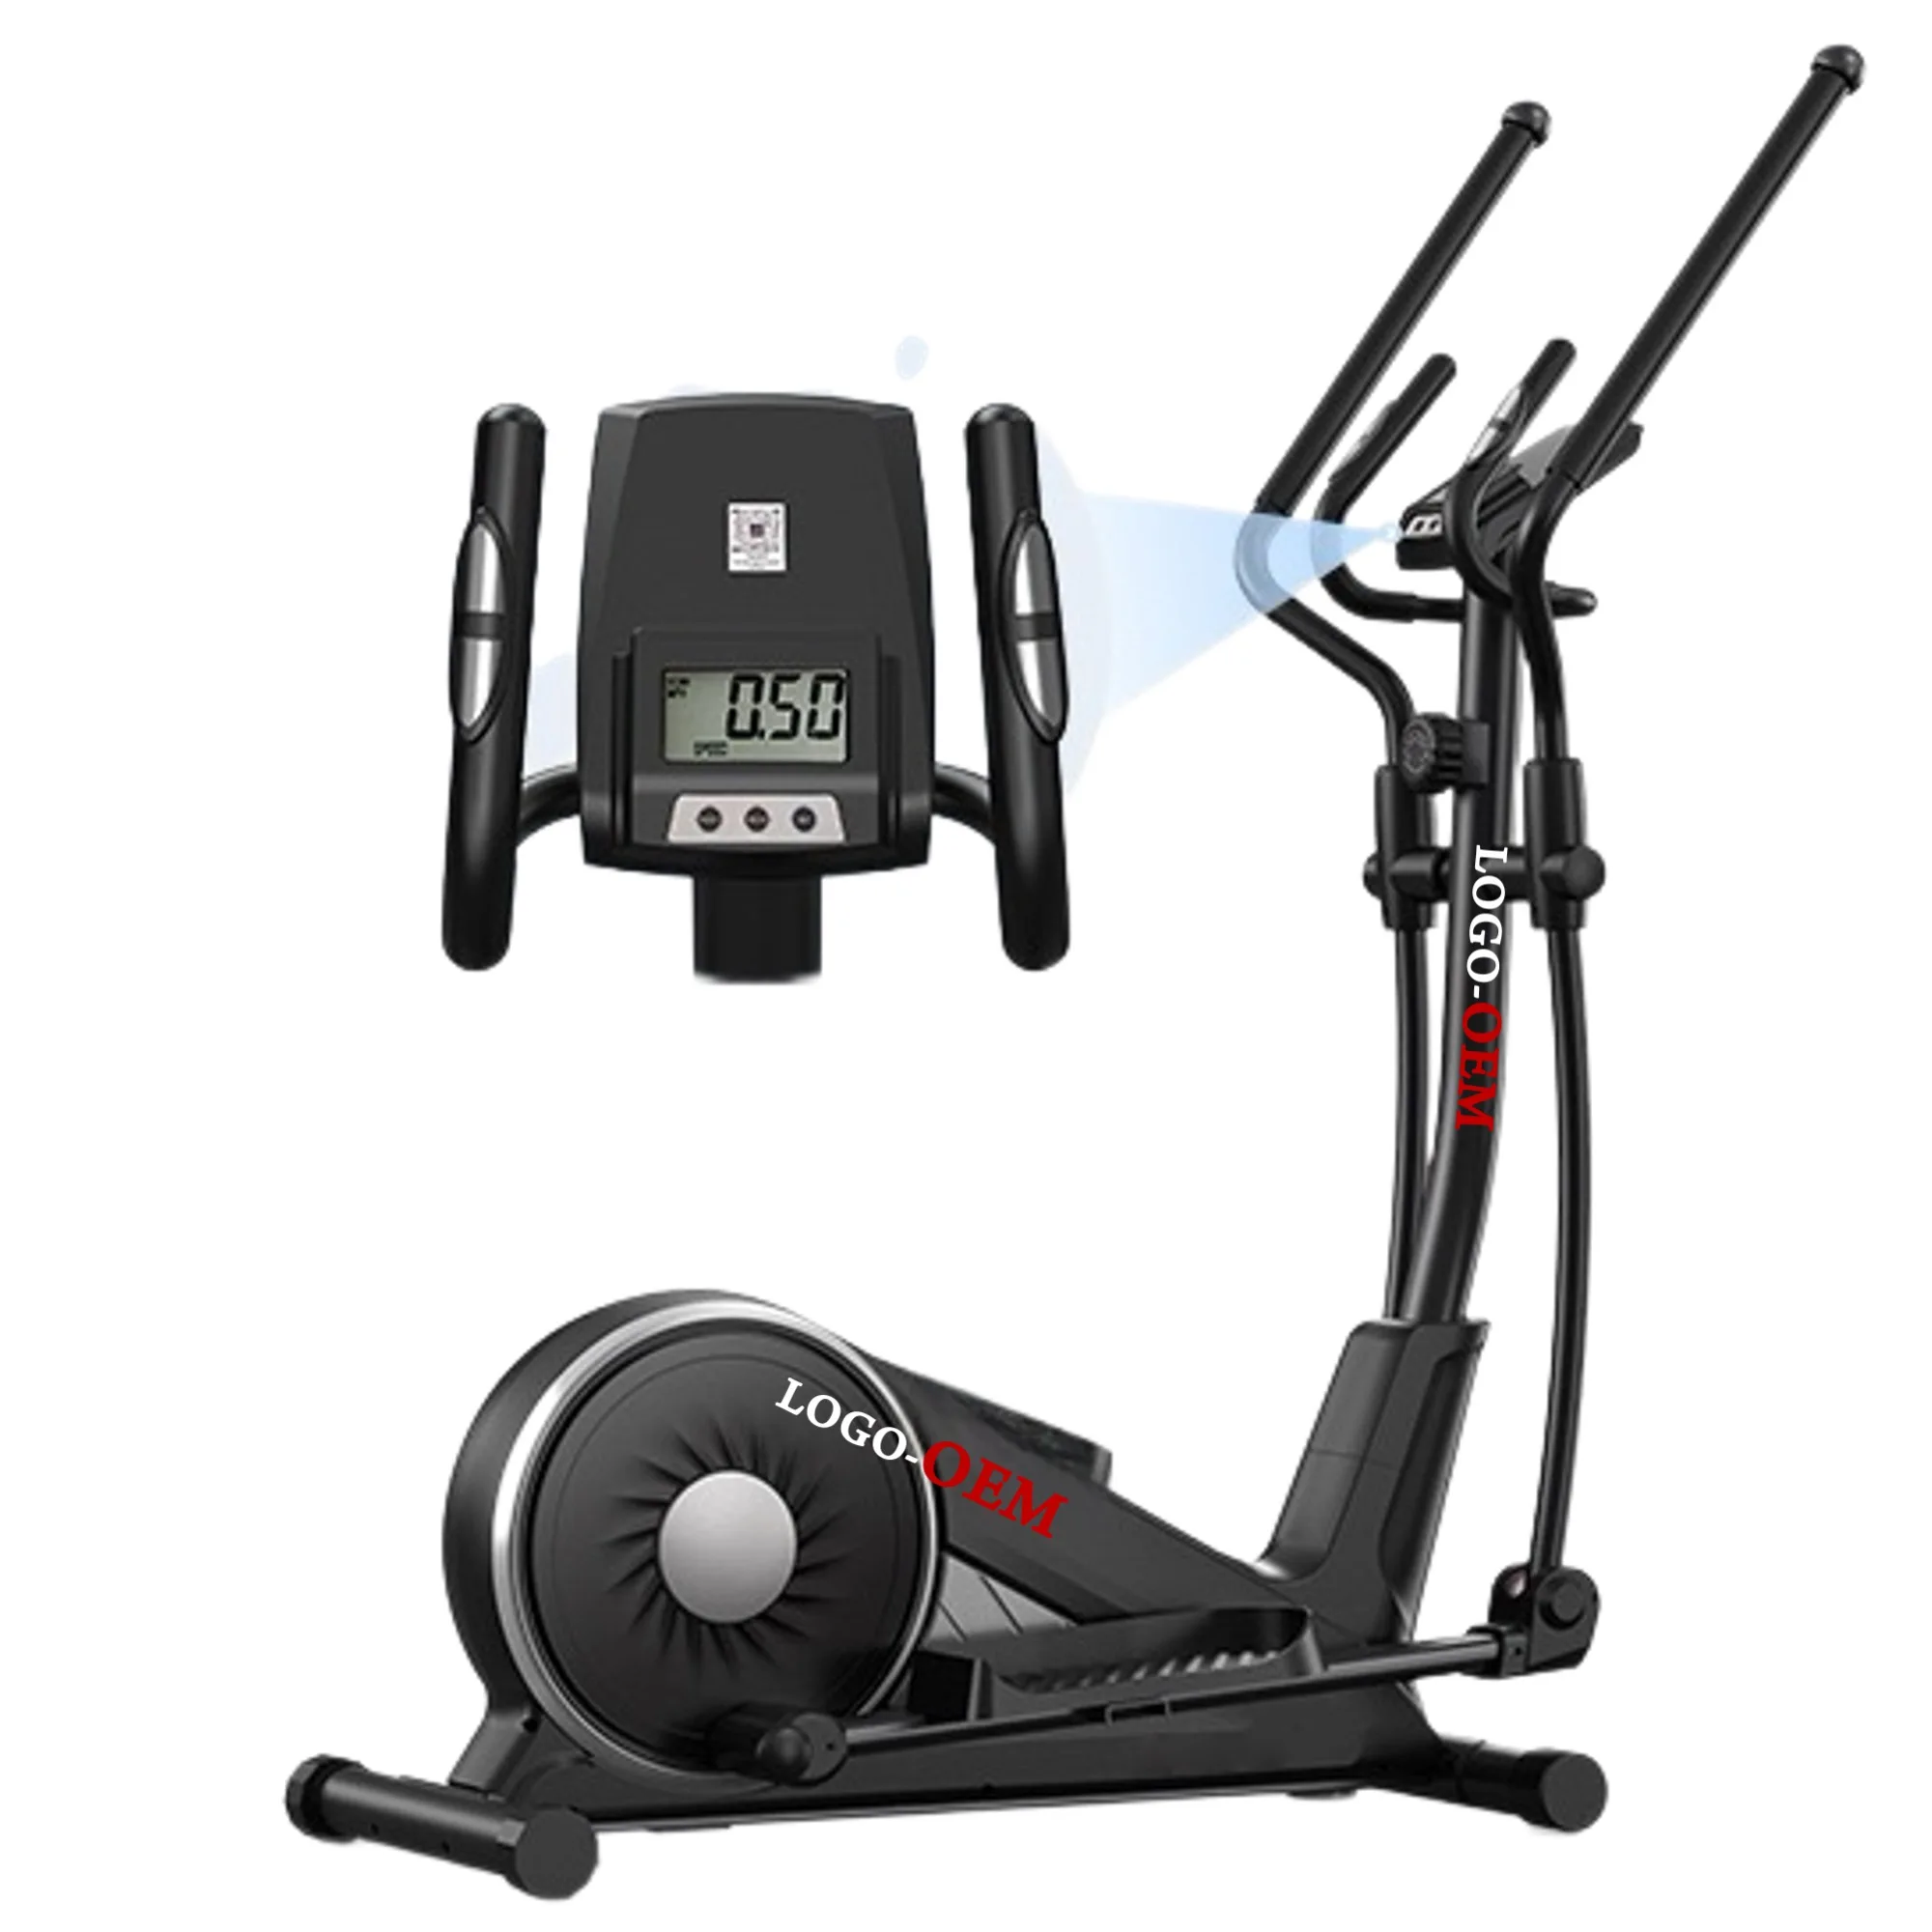 

Elliptical Machine - Elliptical Machine for Home Use, Elliptical Cross Trainer with Hyper-Quiet Magnetic Drive System,